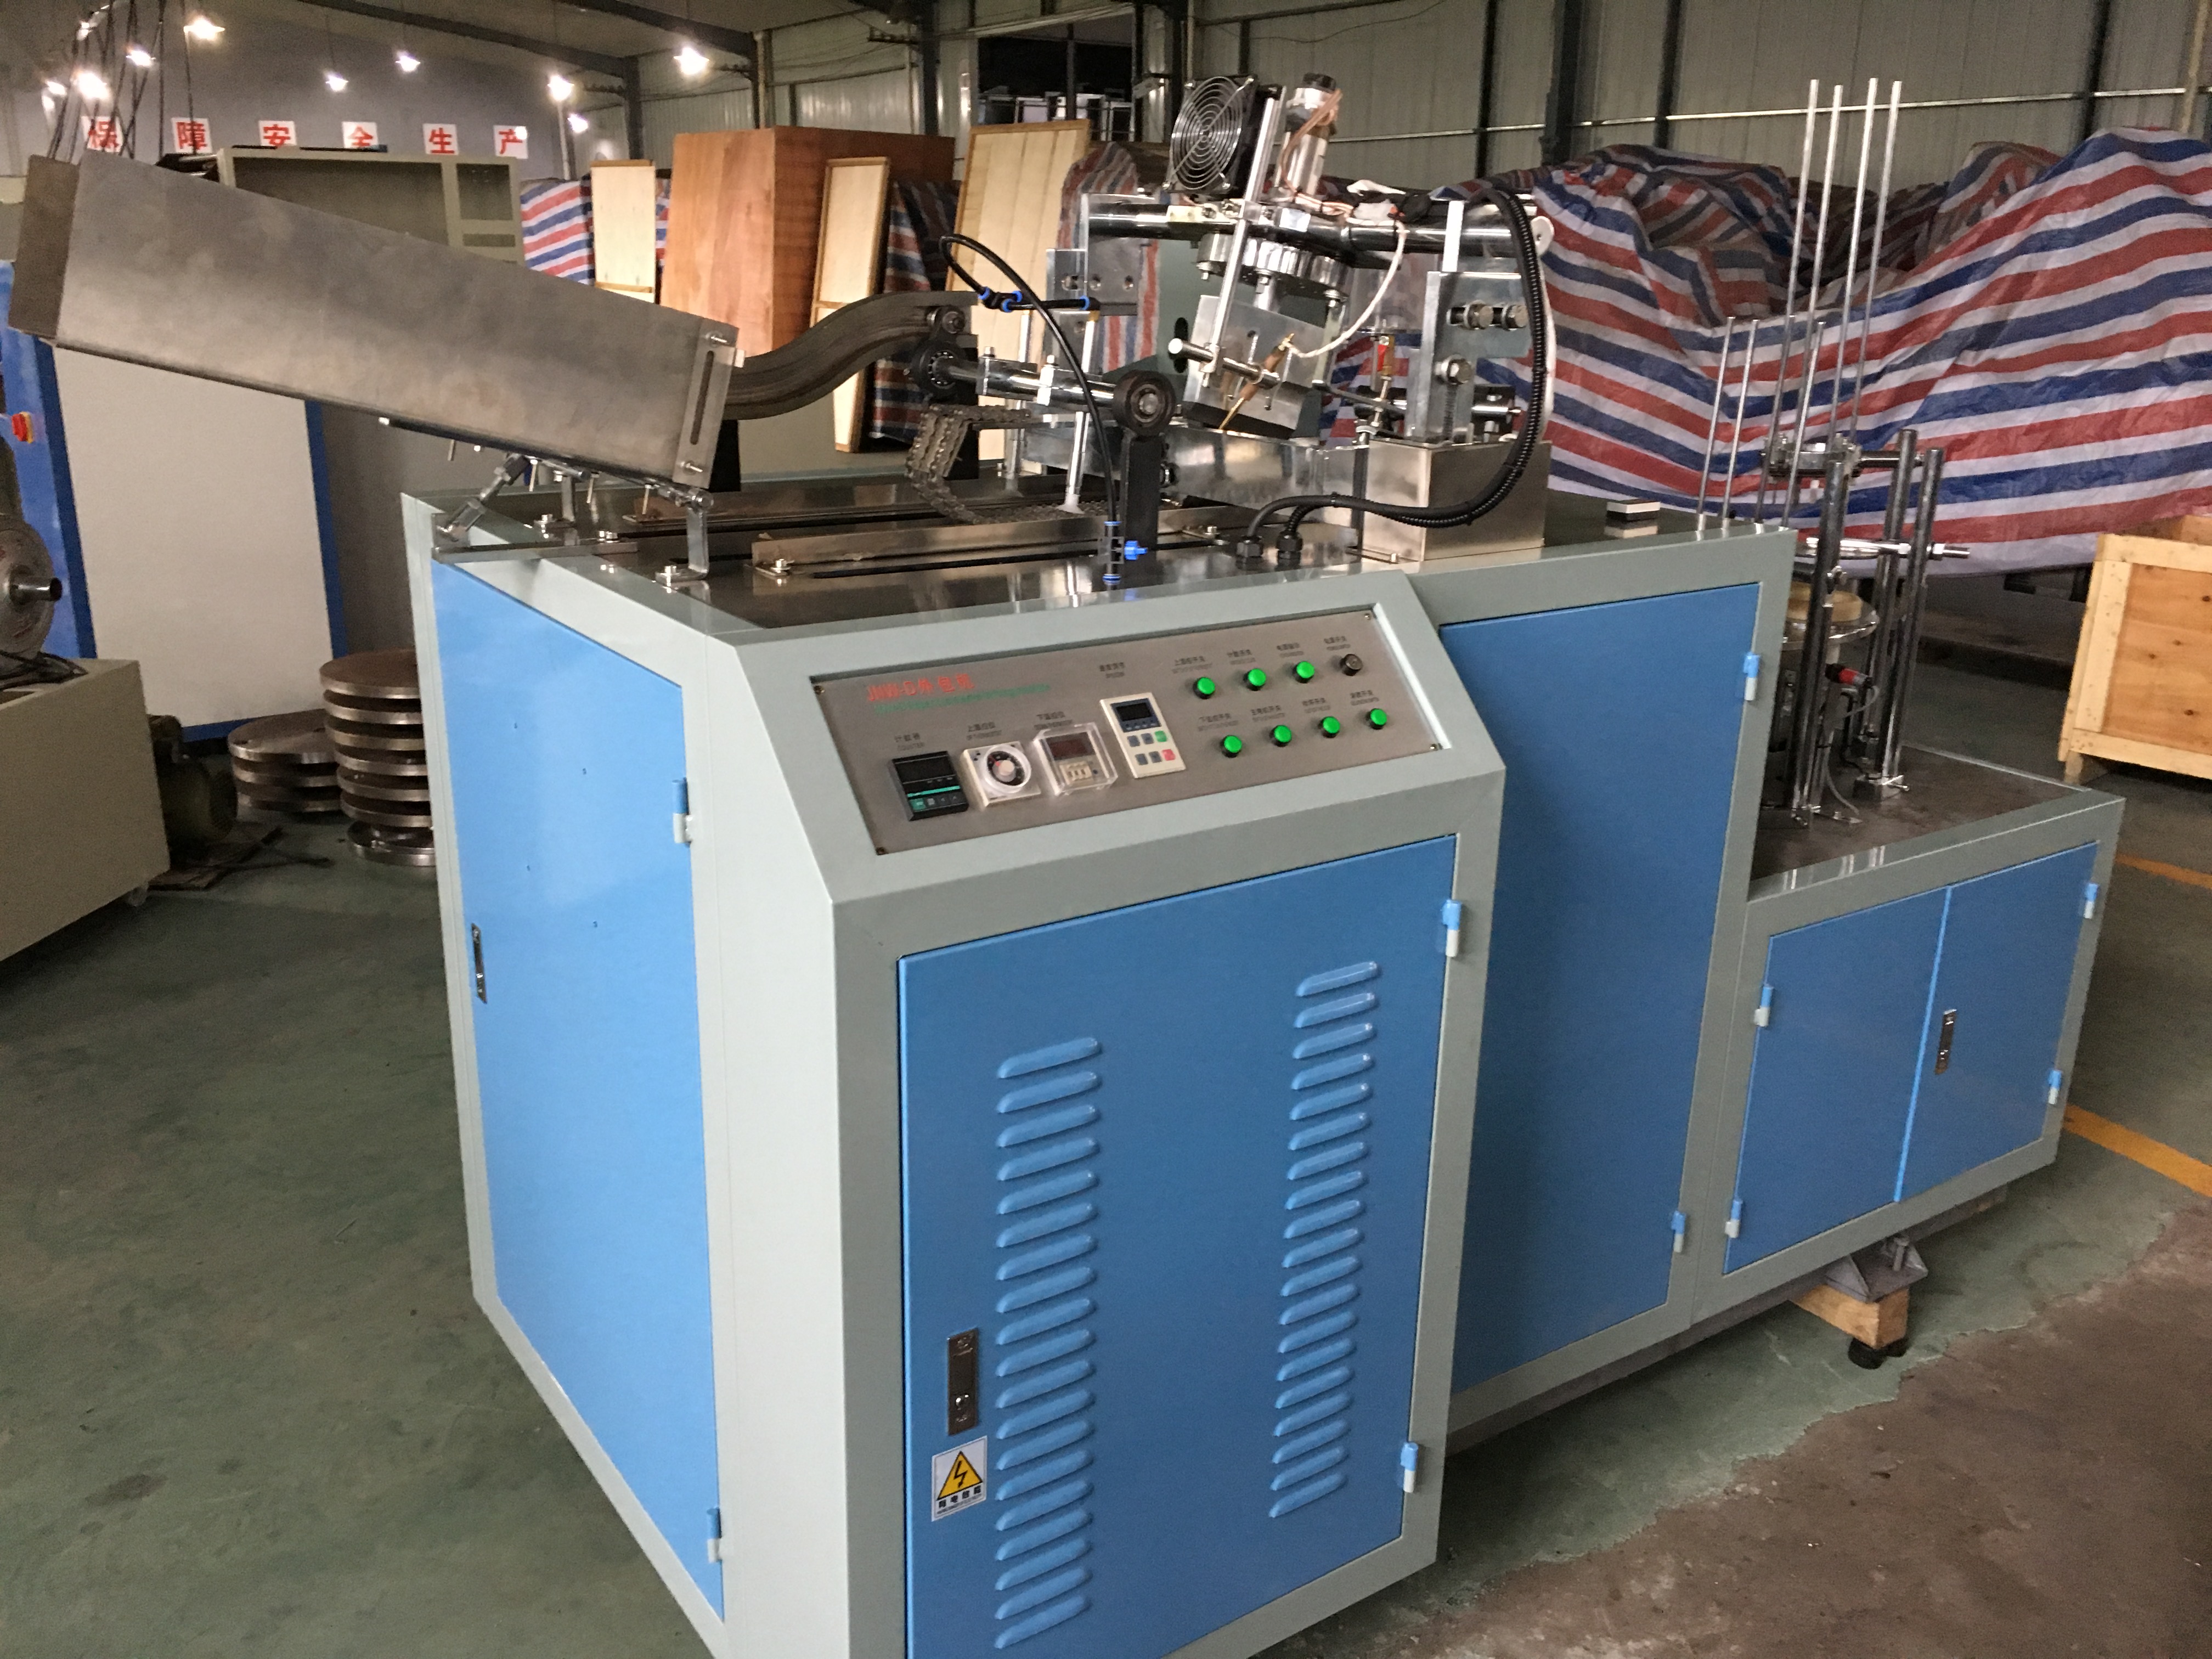 slow speed paper sleeve machine for ripple cup